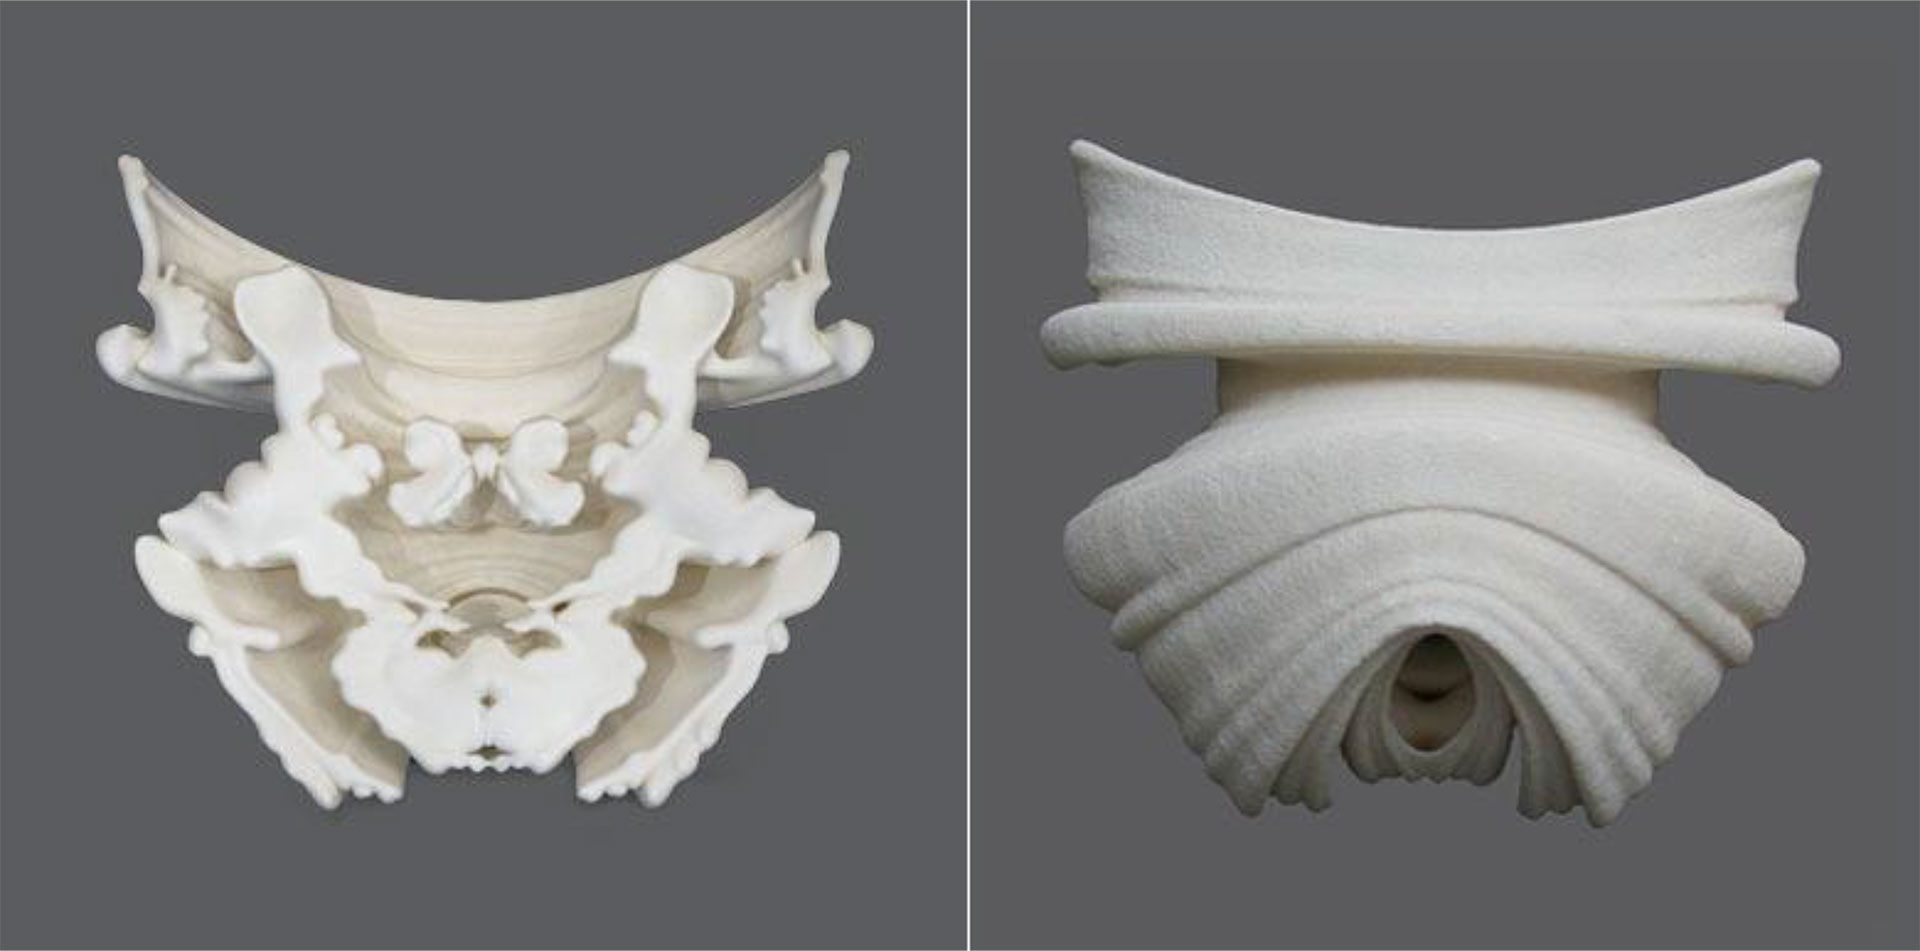 Suzanne Anker, Rorschach series (Gossipers), 2004-05. Rapid Prototype Sculpture. Plaster and resin, Edition of 3. 11” x 8.5” x 5.5”. $3,000. Also available in 4.5” x 5” x 1”. Plaster and resin; ivory white or painted black, Edition of 6. $500.